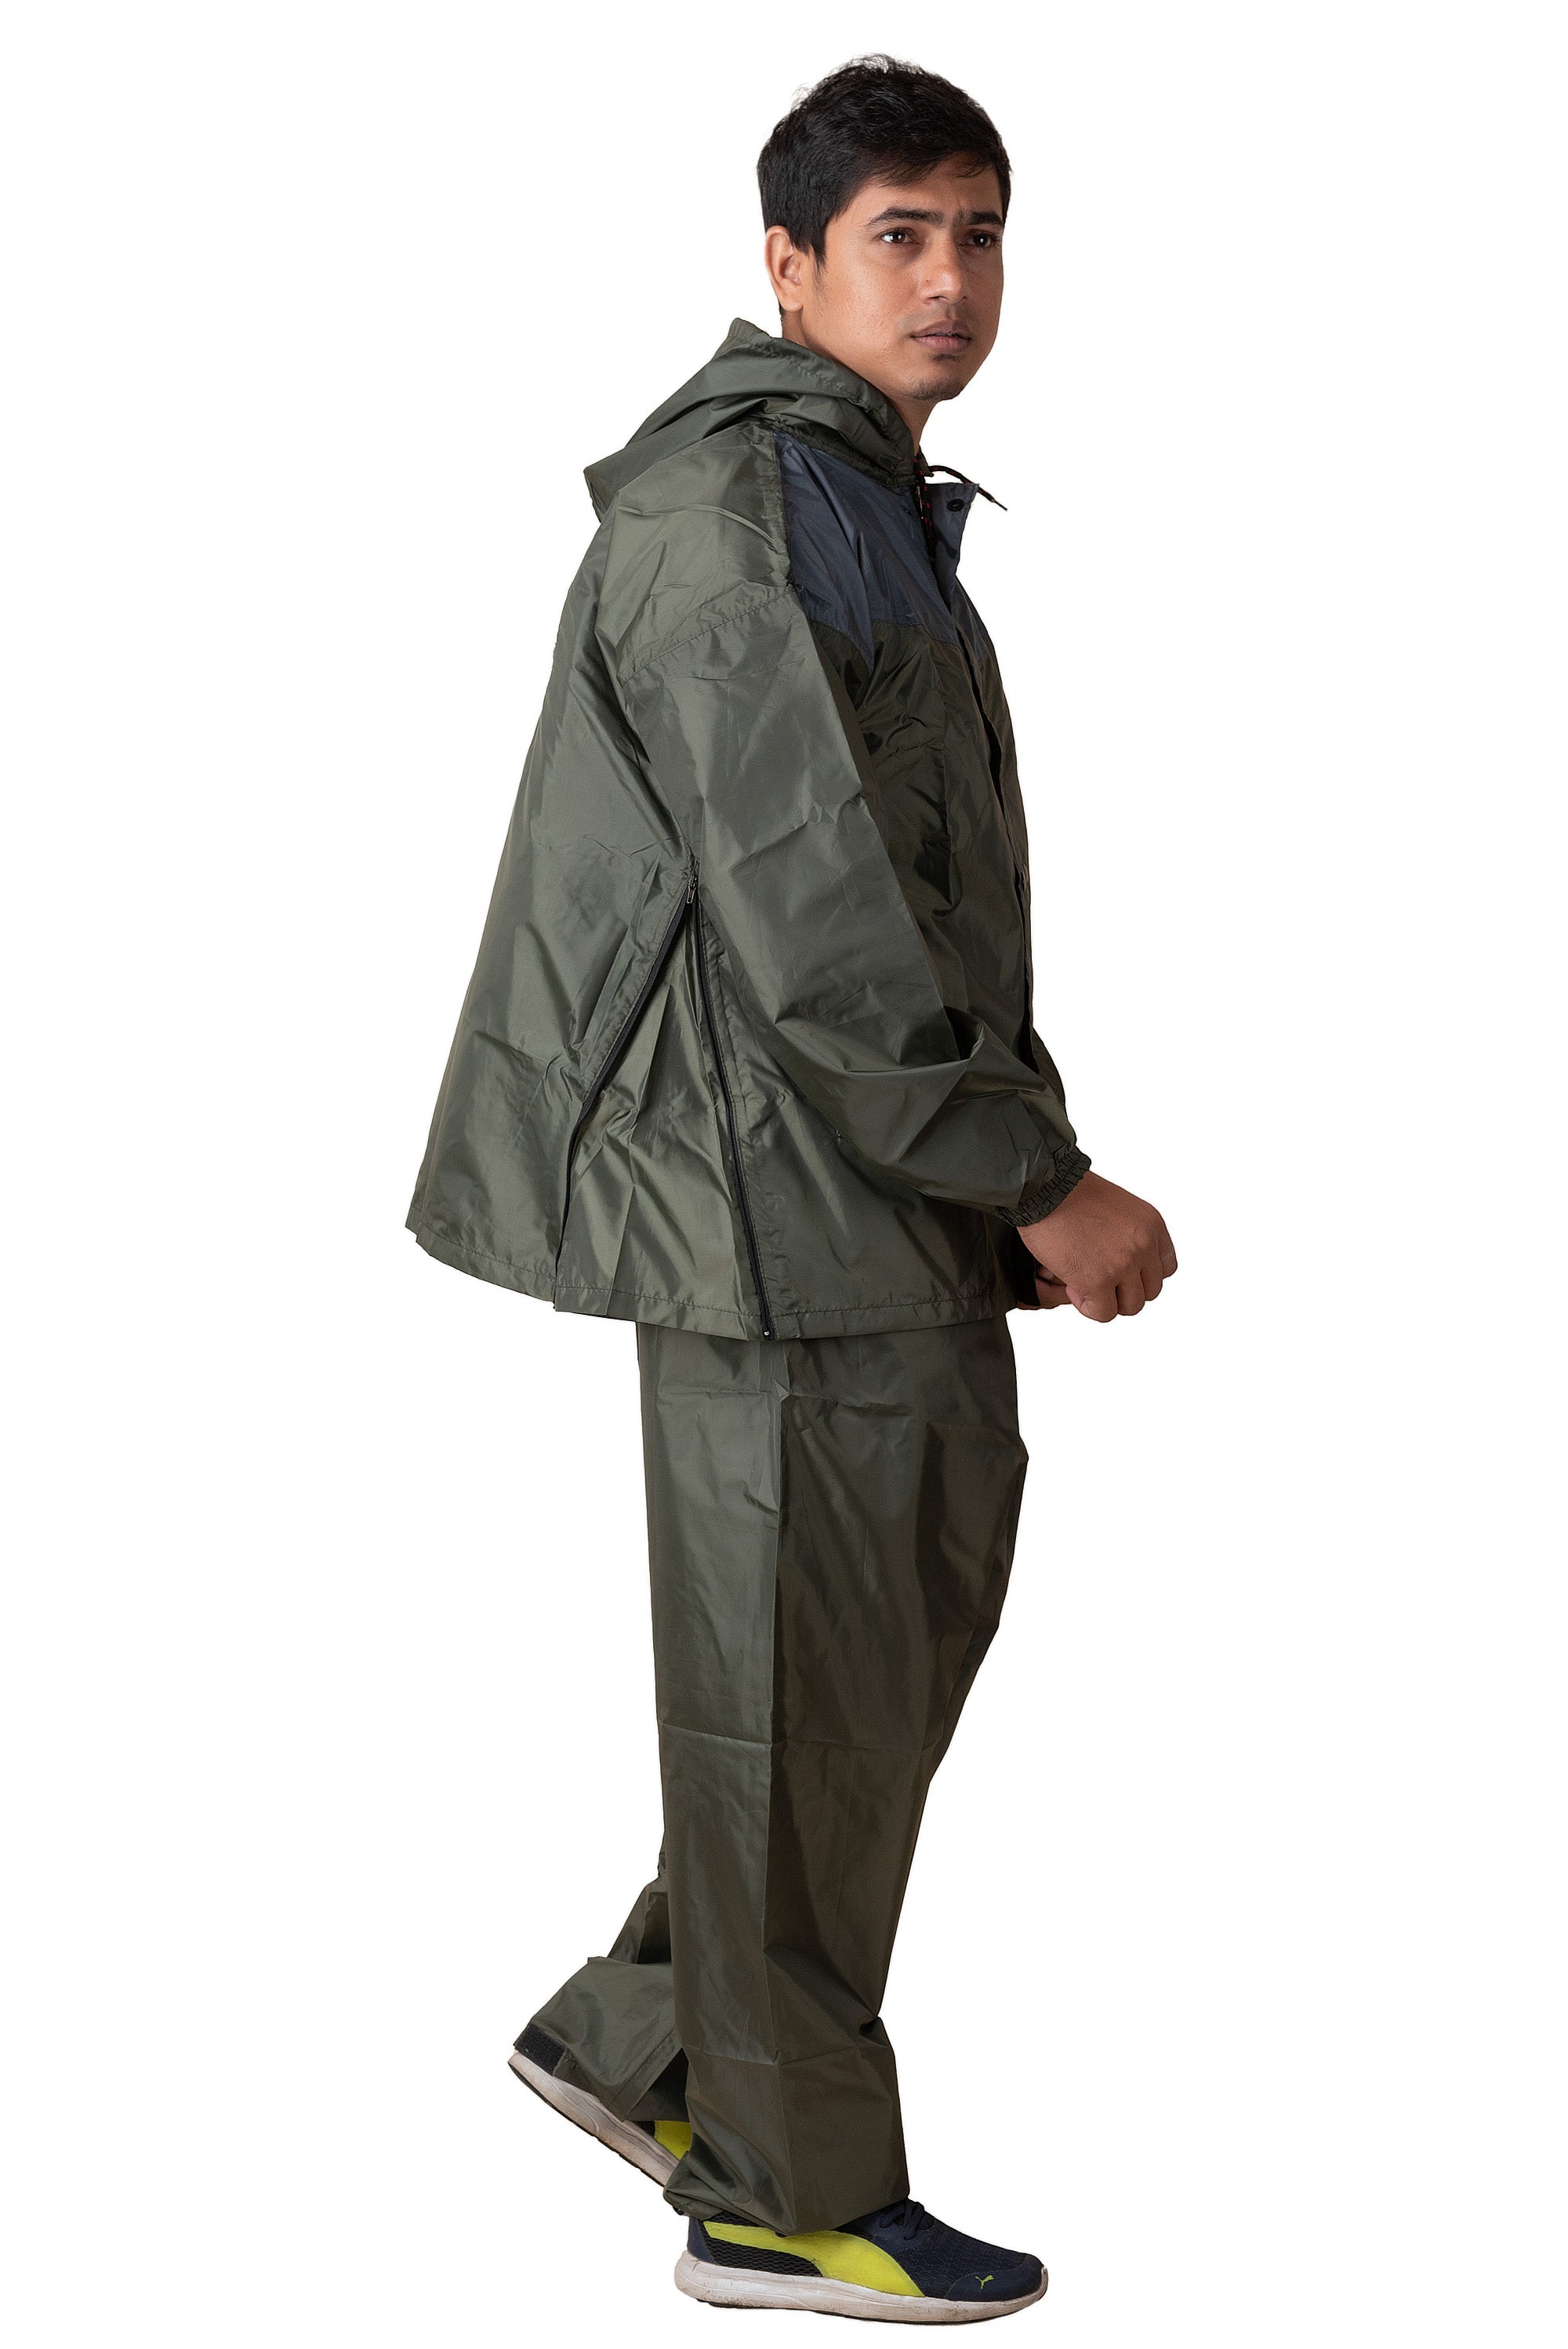 The Dry Cape's Water Ranger: Premium Dual-Tone Raincoat for Men | Bike Riding Waterproof Gear with Reflective Safety & Adjustable Features